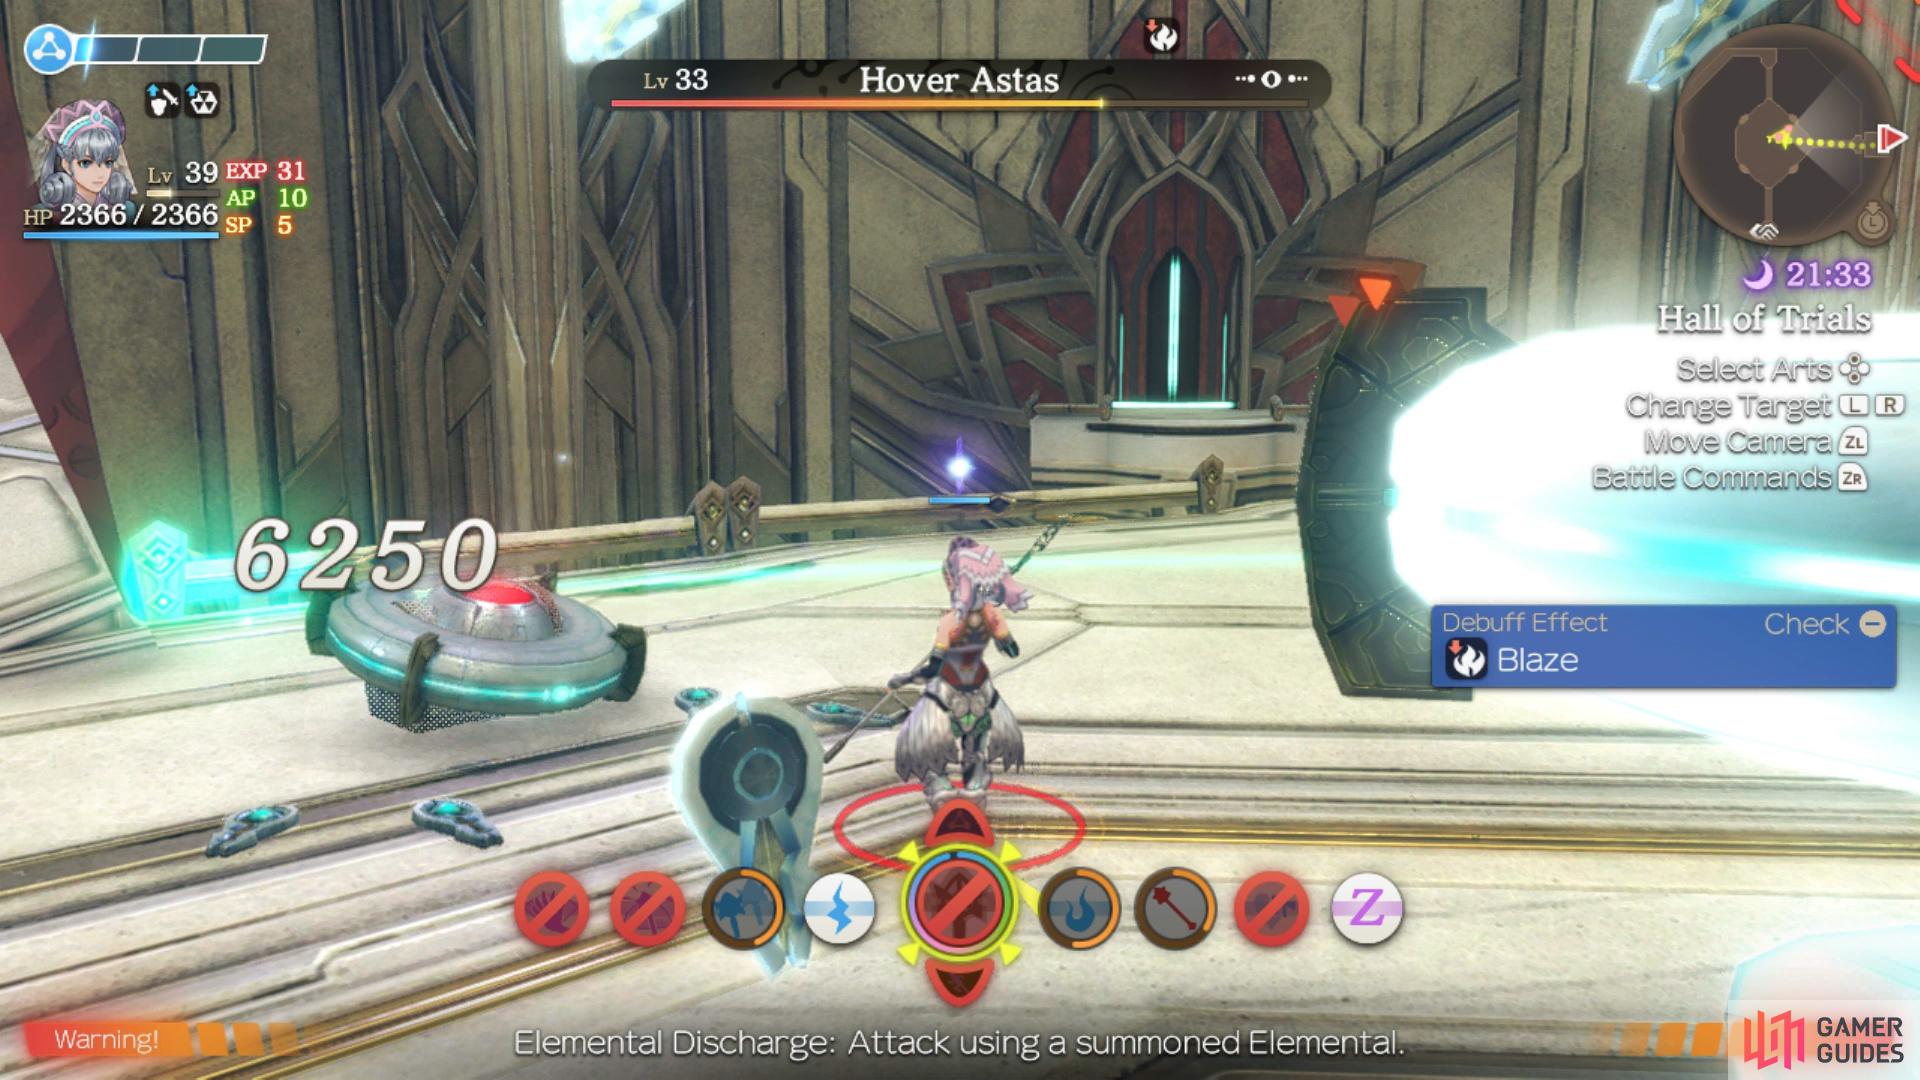 Make use of Summon Bolt to dispatch the enemies easily when Melia is alone.